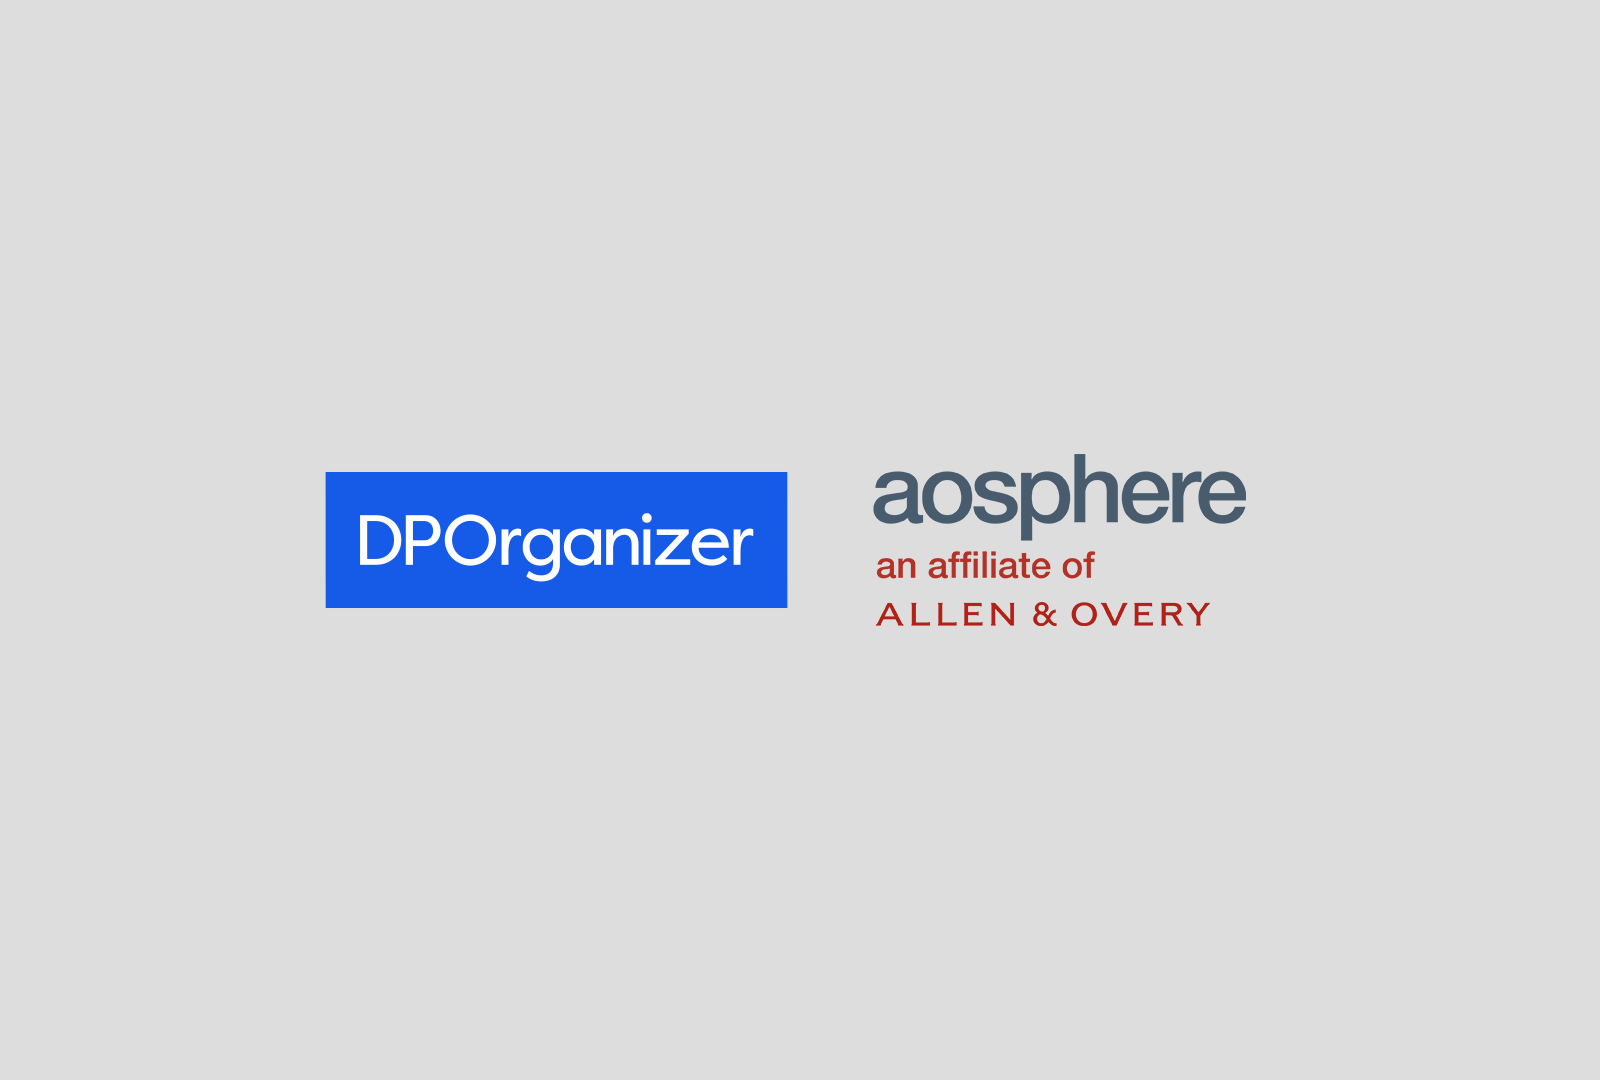 DPOrganizer and aosphere launch collaboration for global privacy law research